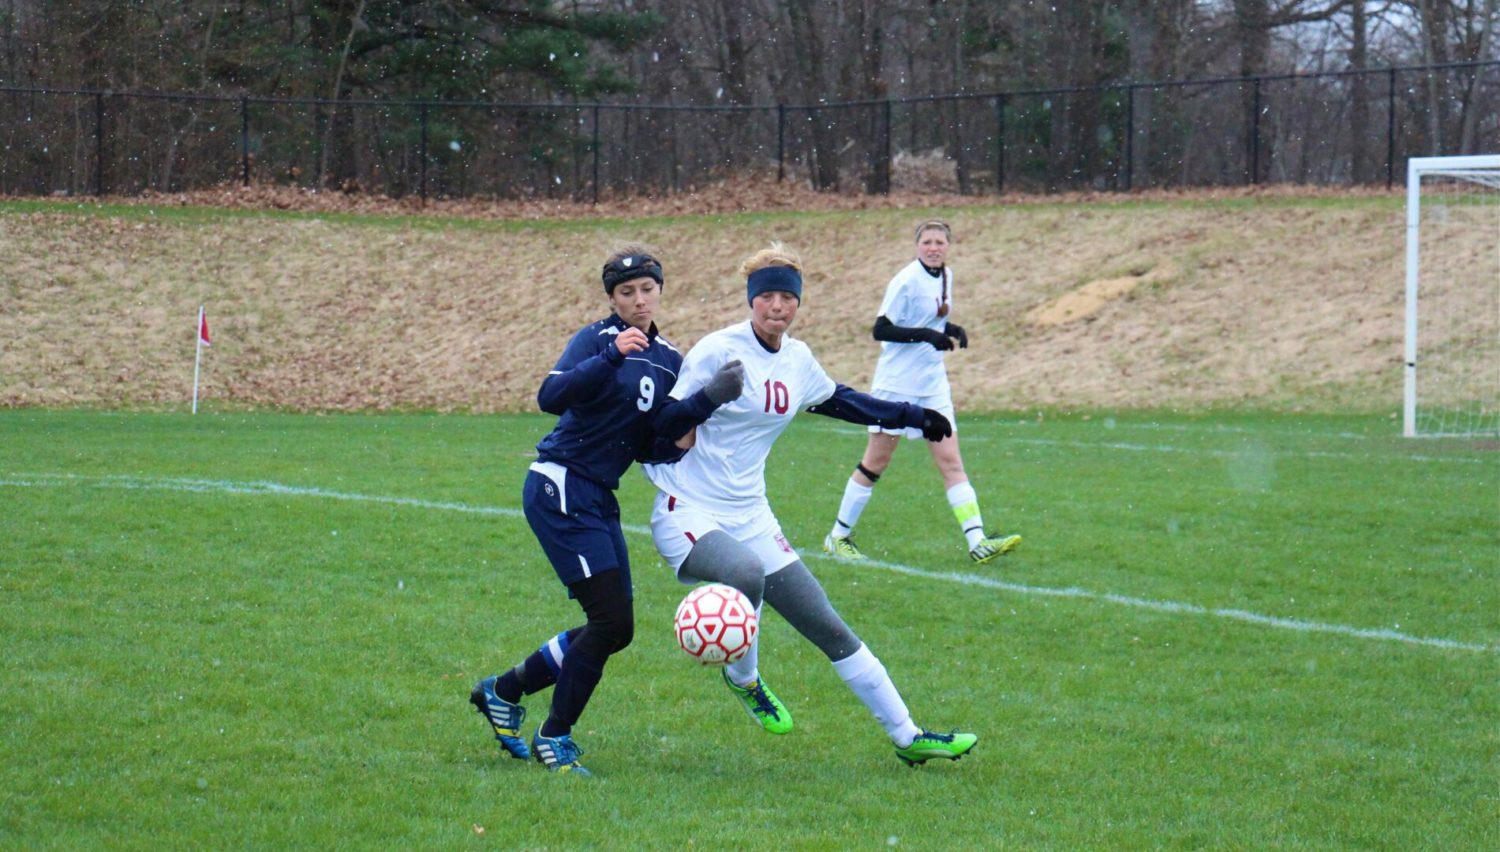 Fruitport overcomes harsh weather conditions, shuts out Orchard View 2-0 in Lakes 8 soccer